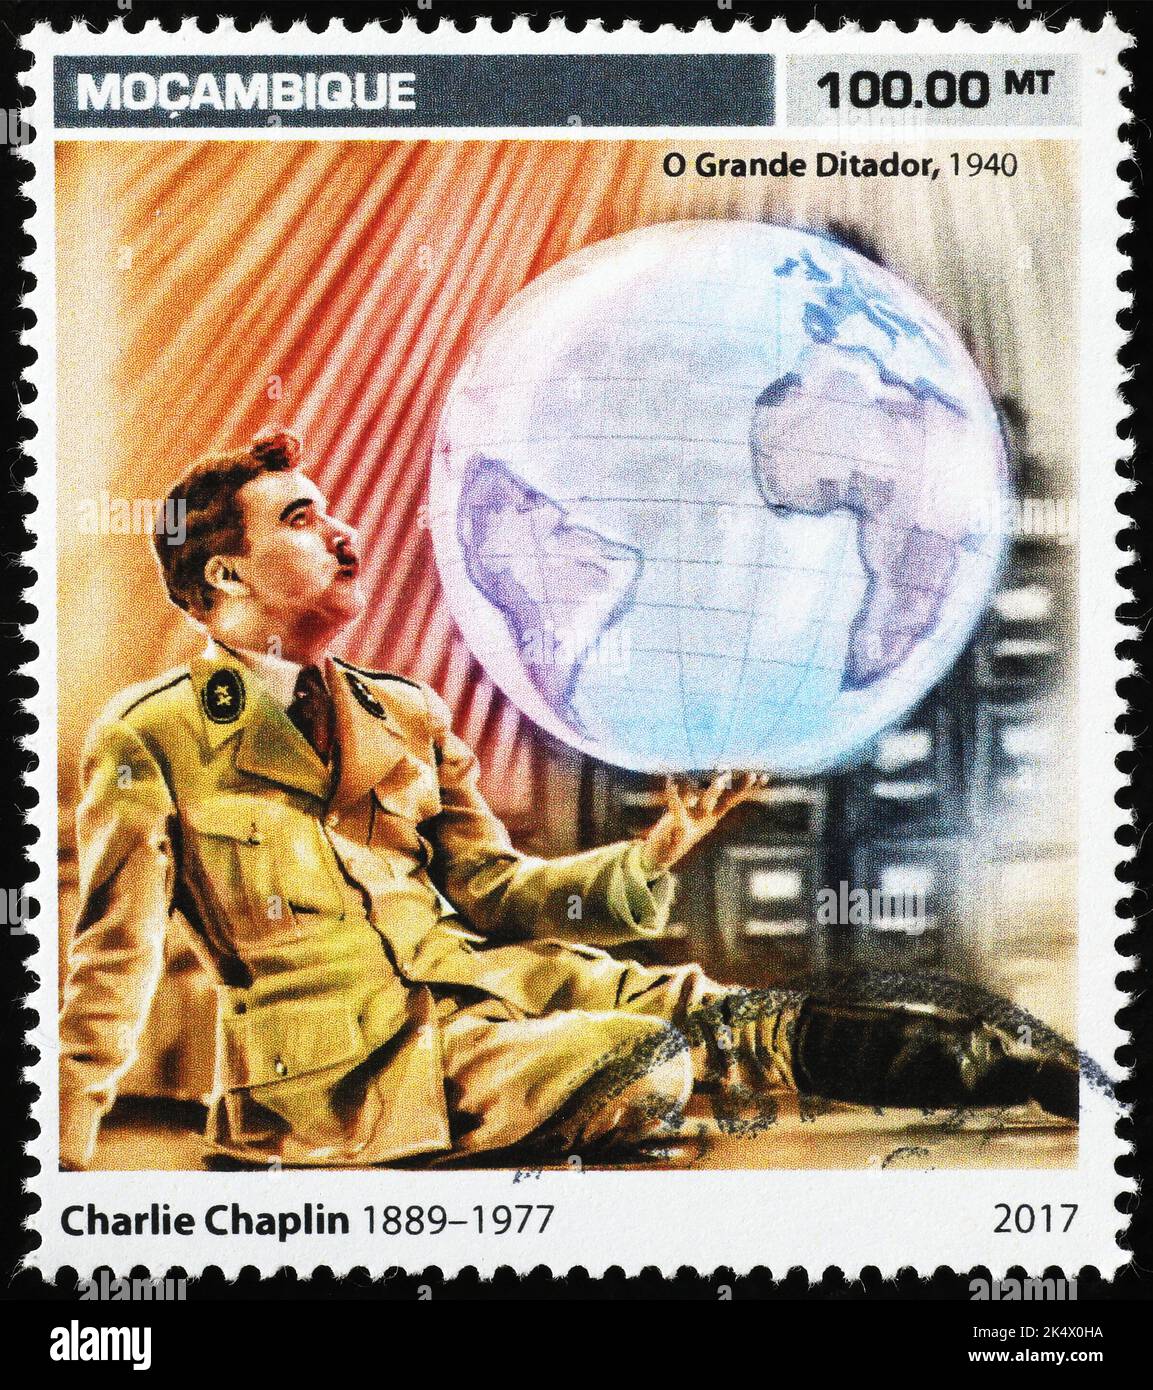 Scene from The Great Dictator by Chalie Chaplin on postage stamp Stock Photo